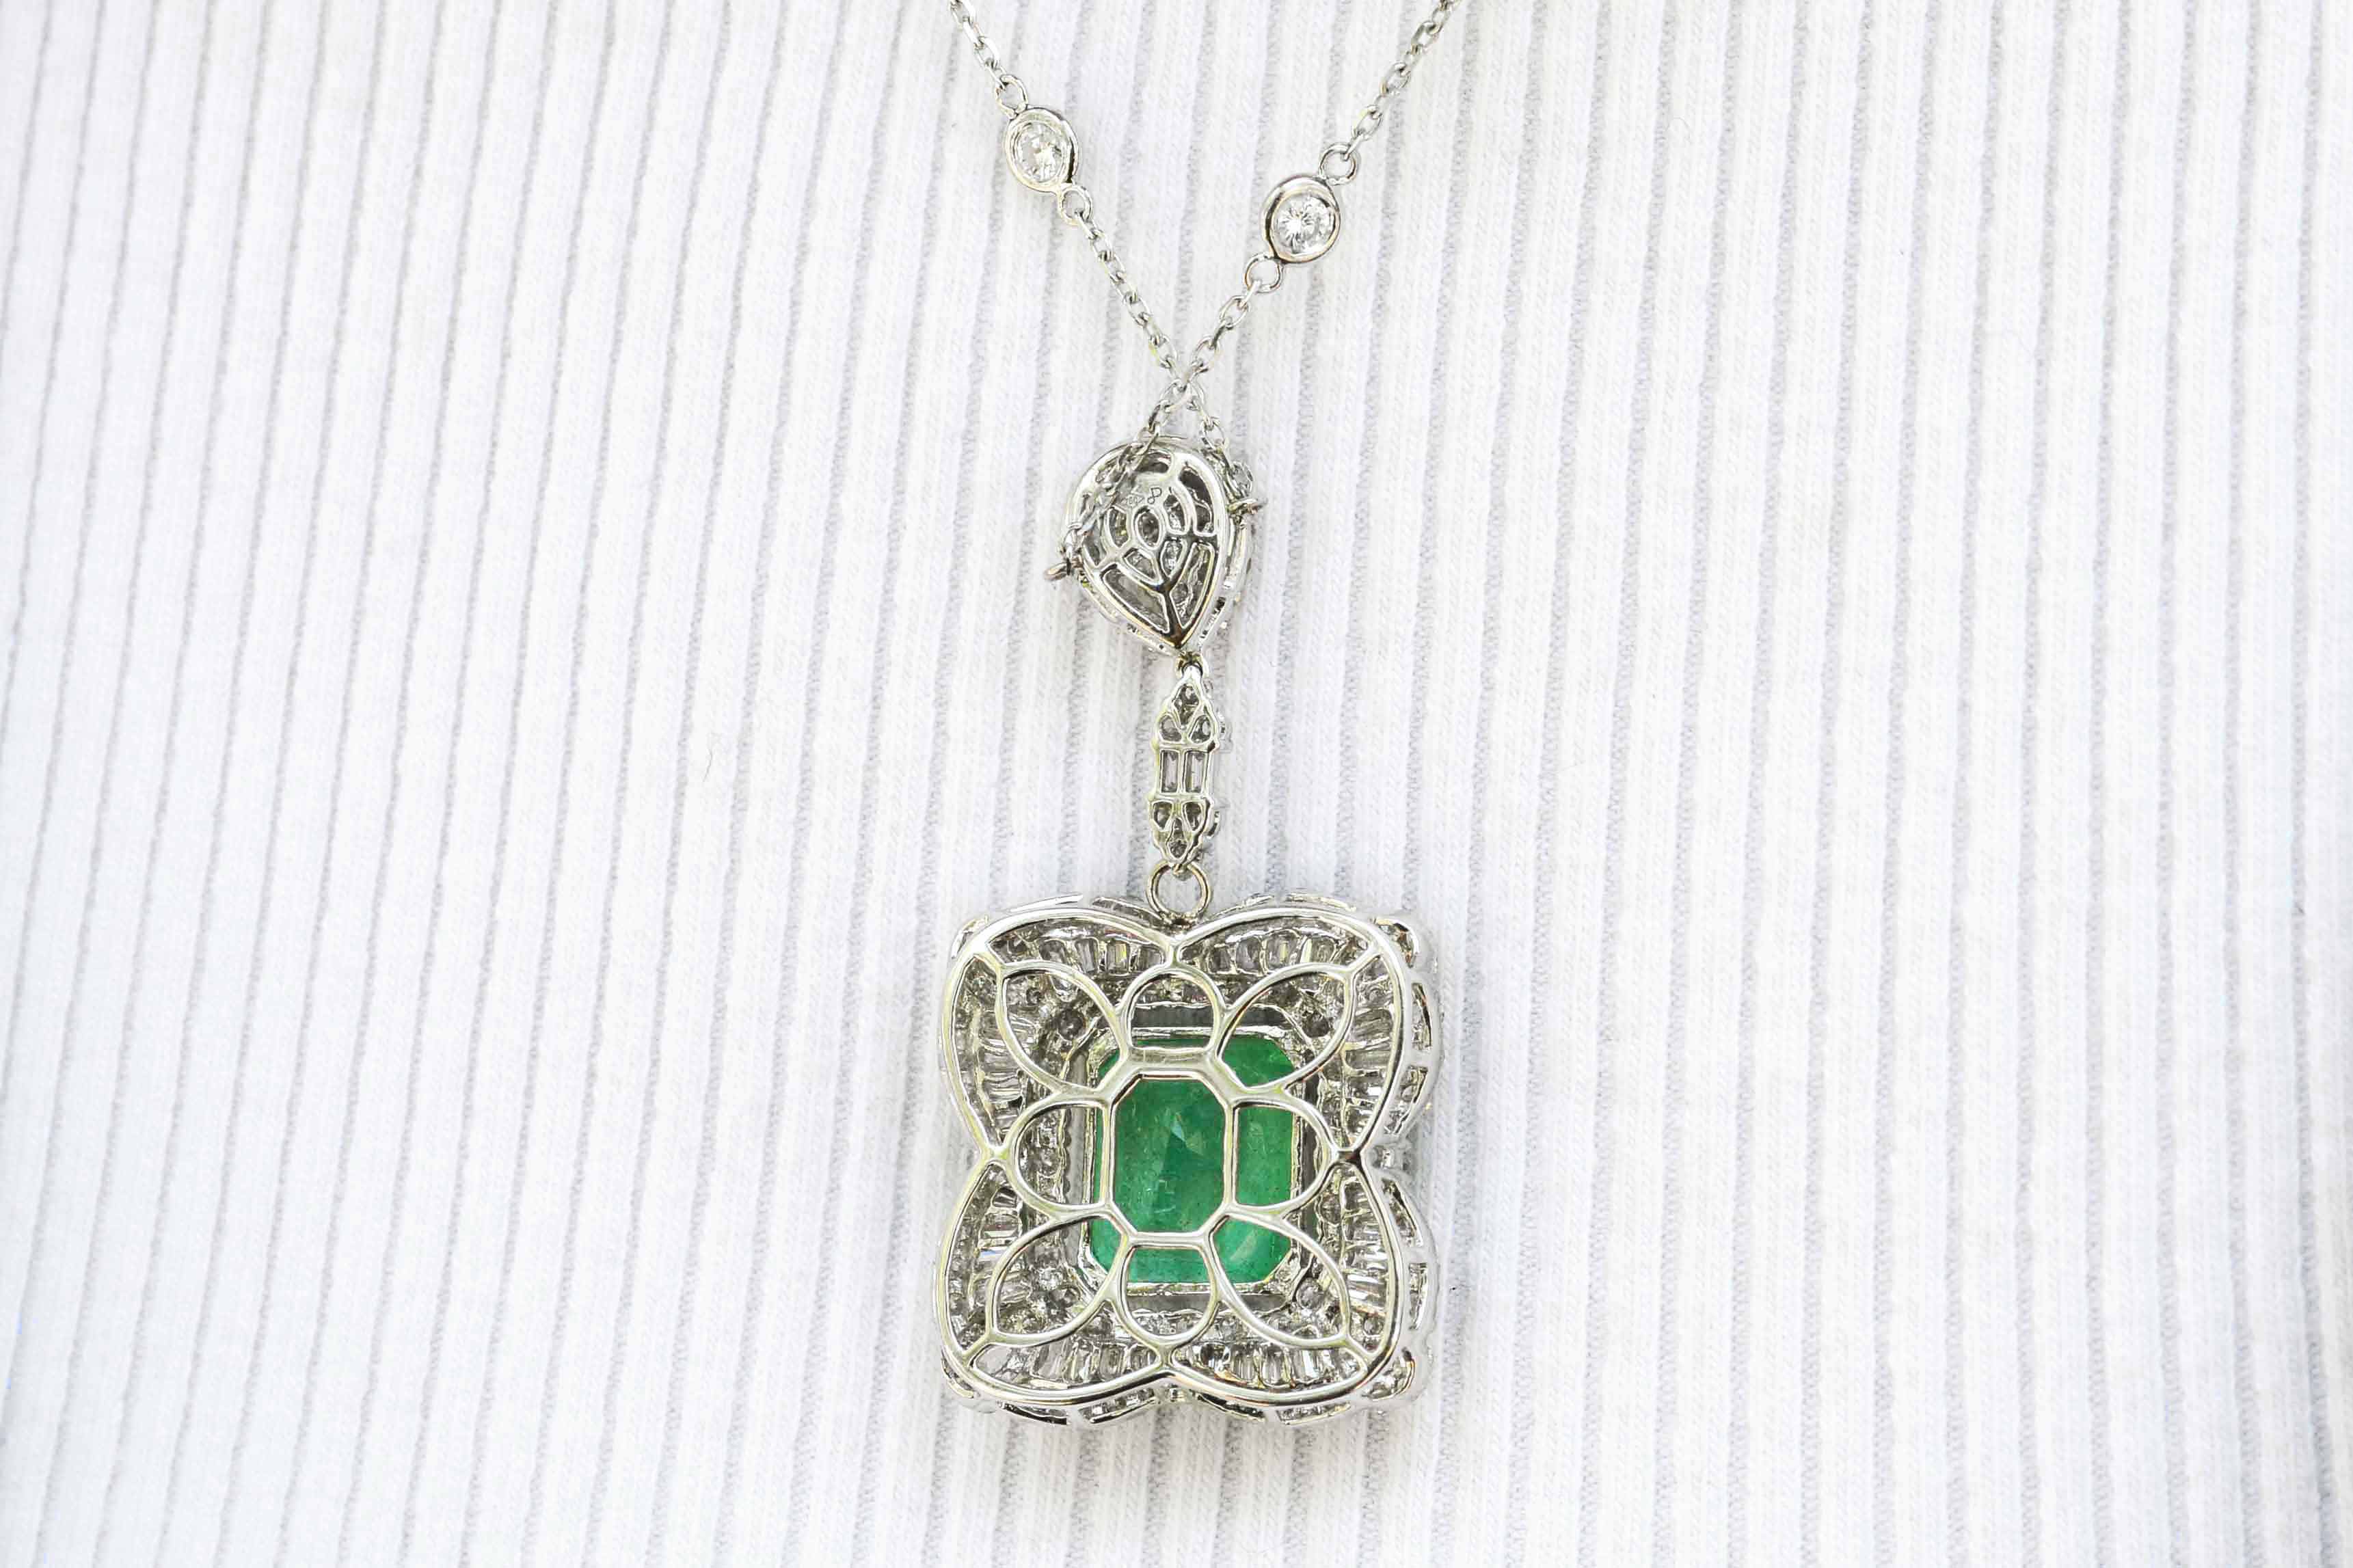 The emerald cut gem of nearly 8 carats glows with a vivid green fire in this white gold pendant necklace.